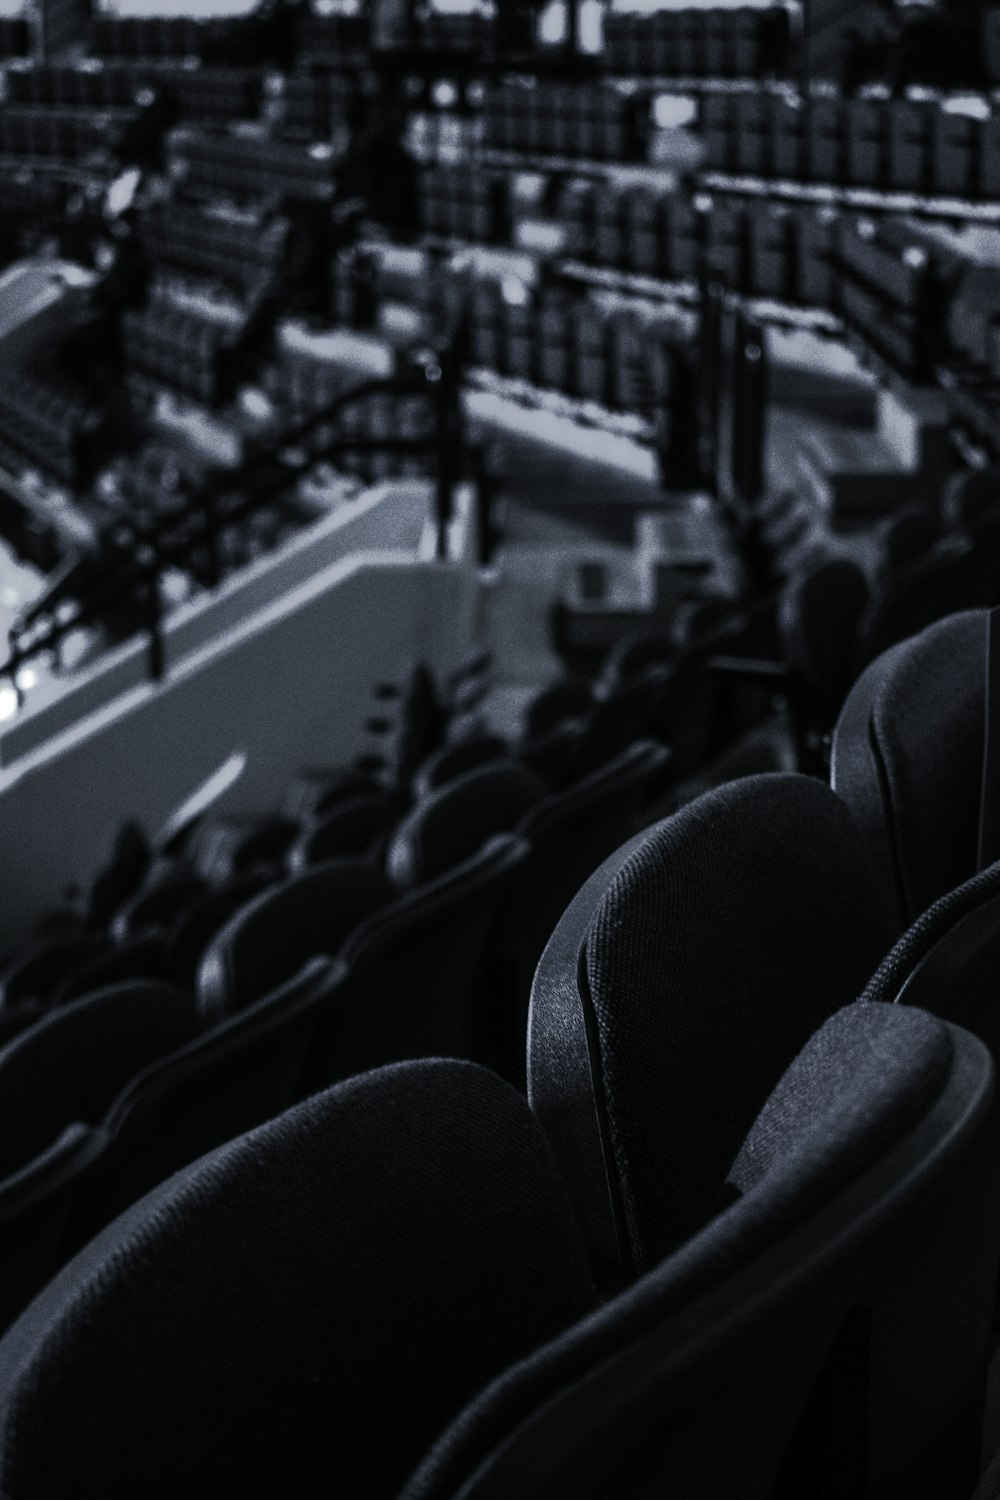 black and gray chairs in stadium